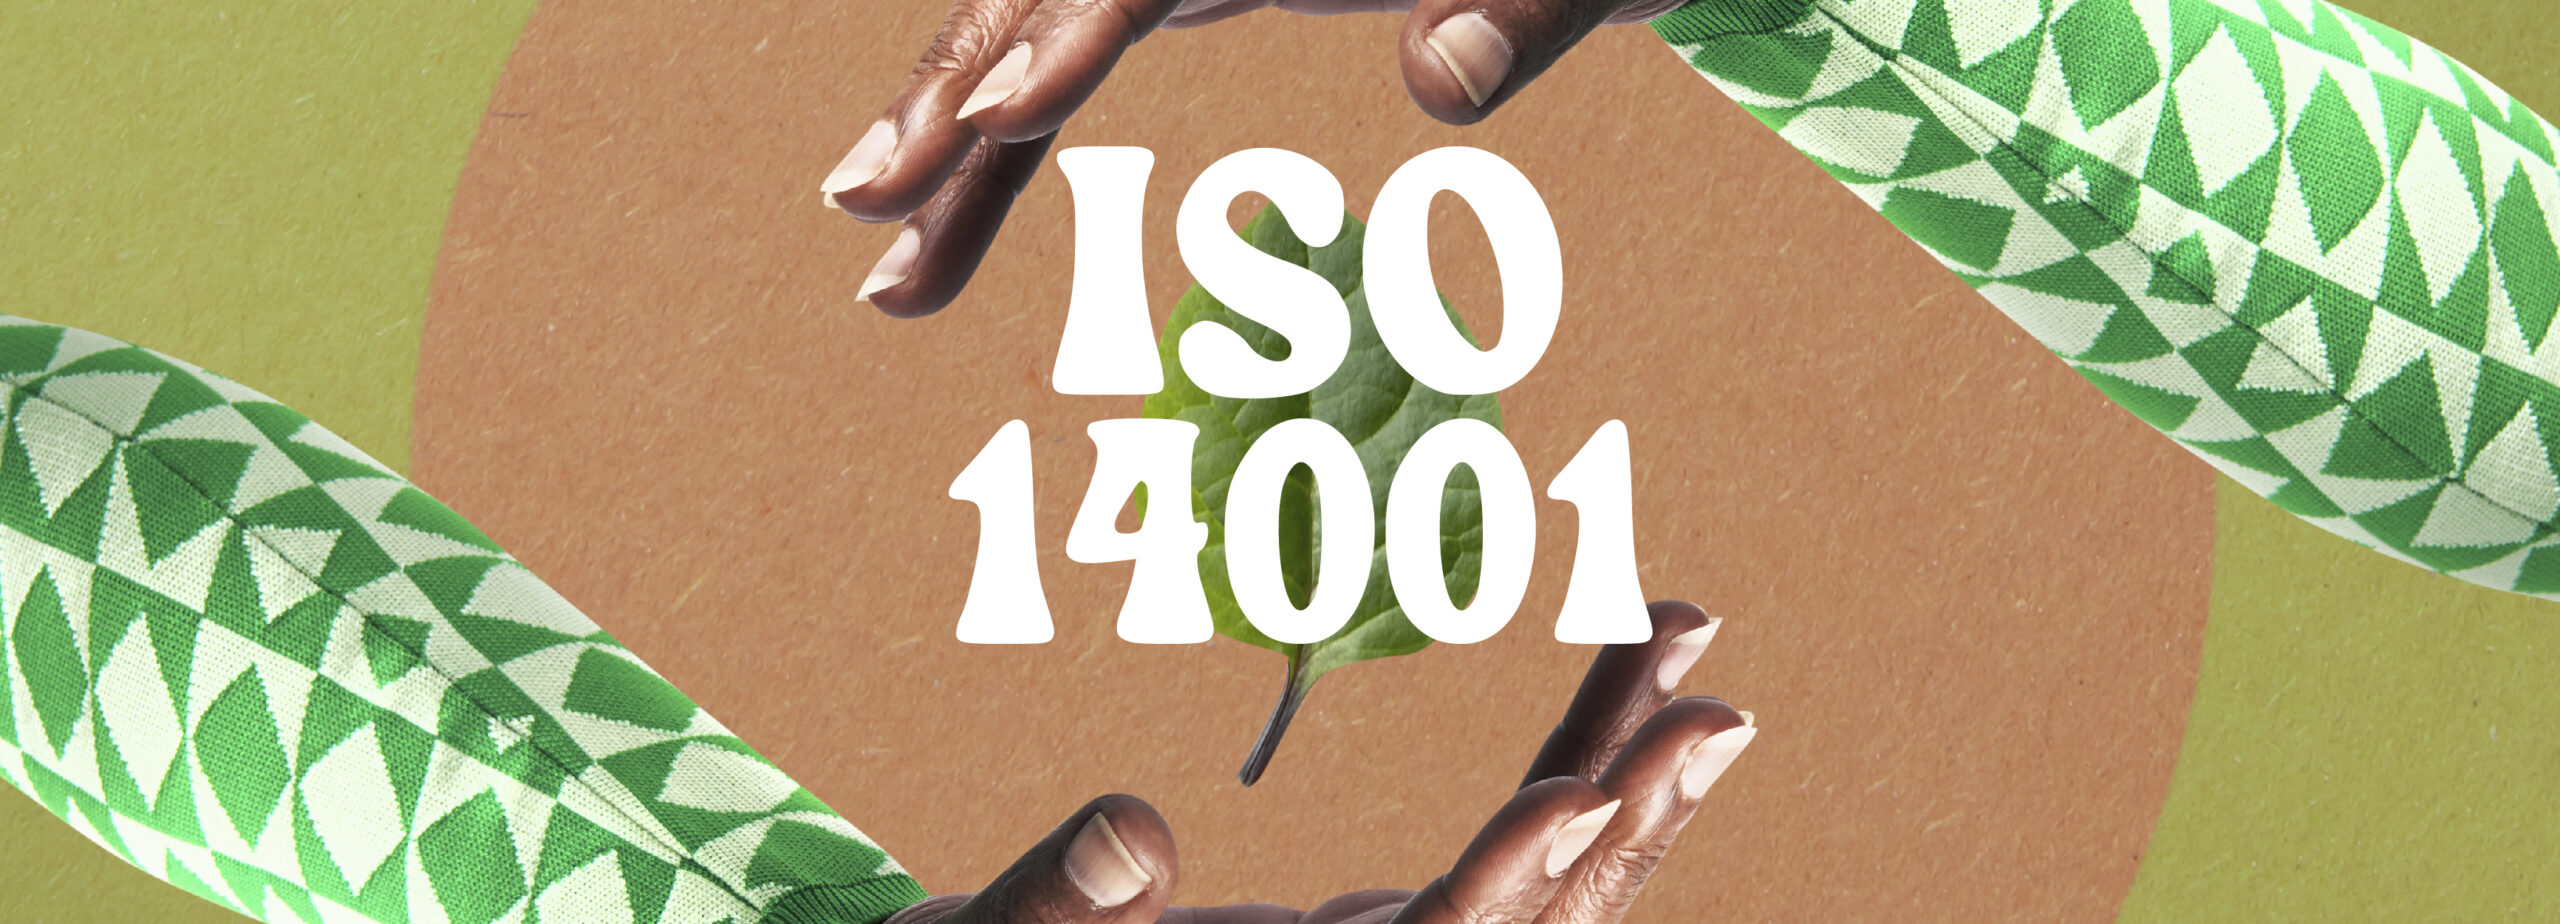 IS014001 BANNER scaled ISO14001